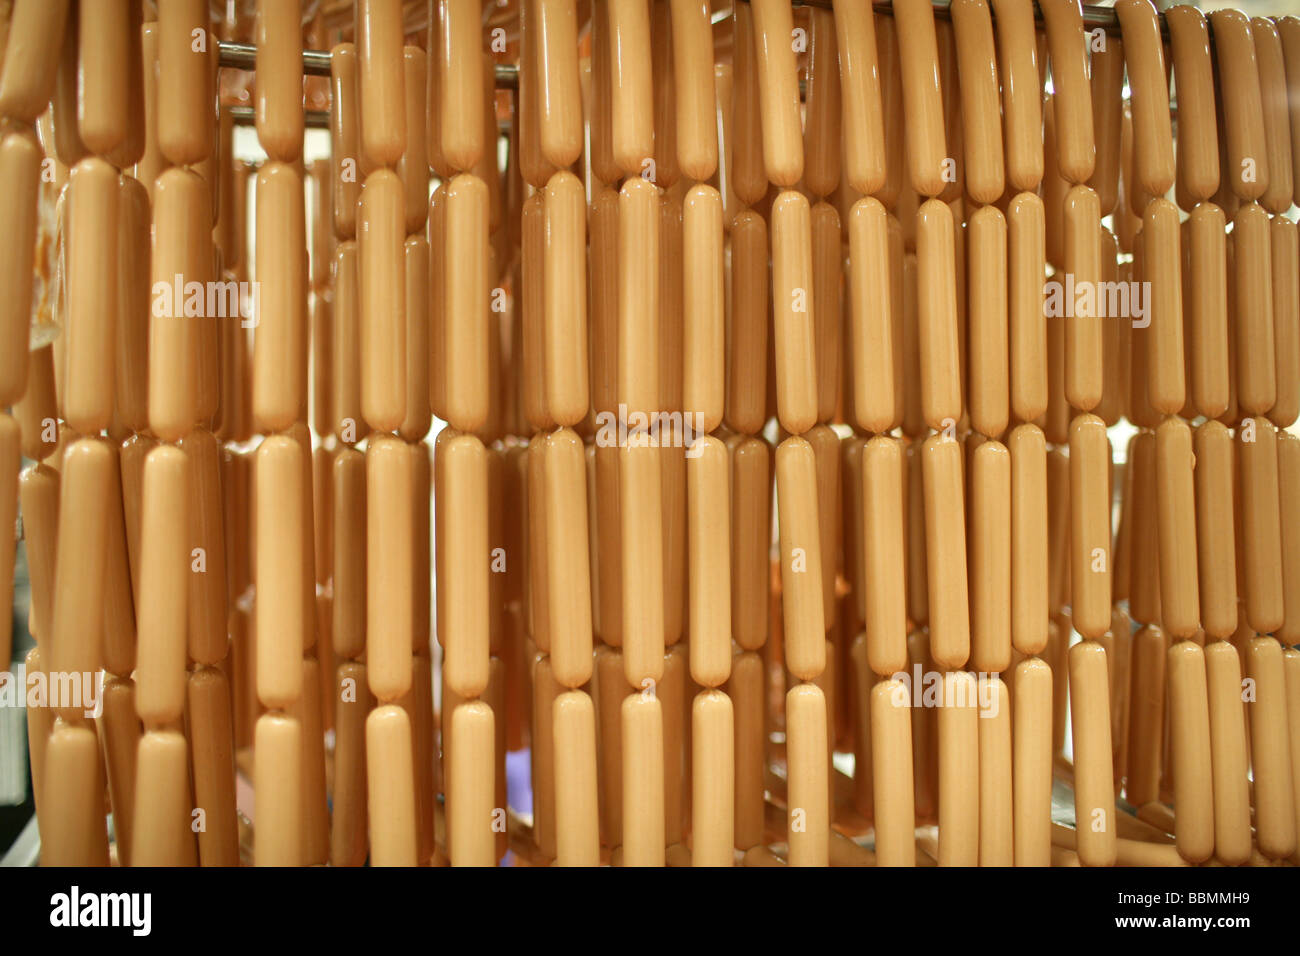 Rows of hotdogs in a Hotdog manufacturing plant Stock Photo